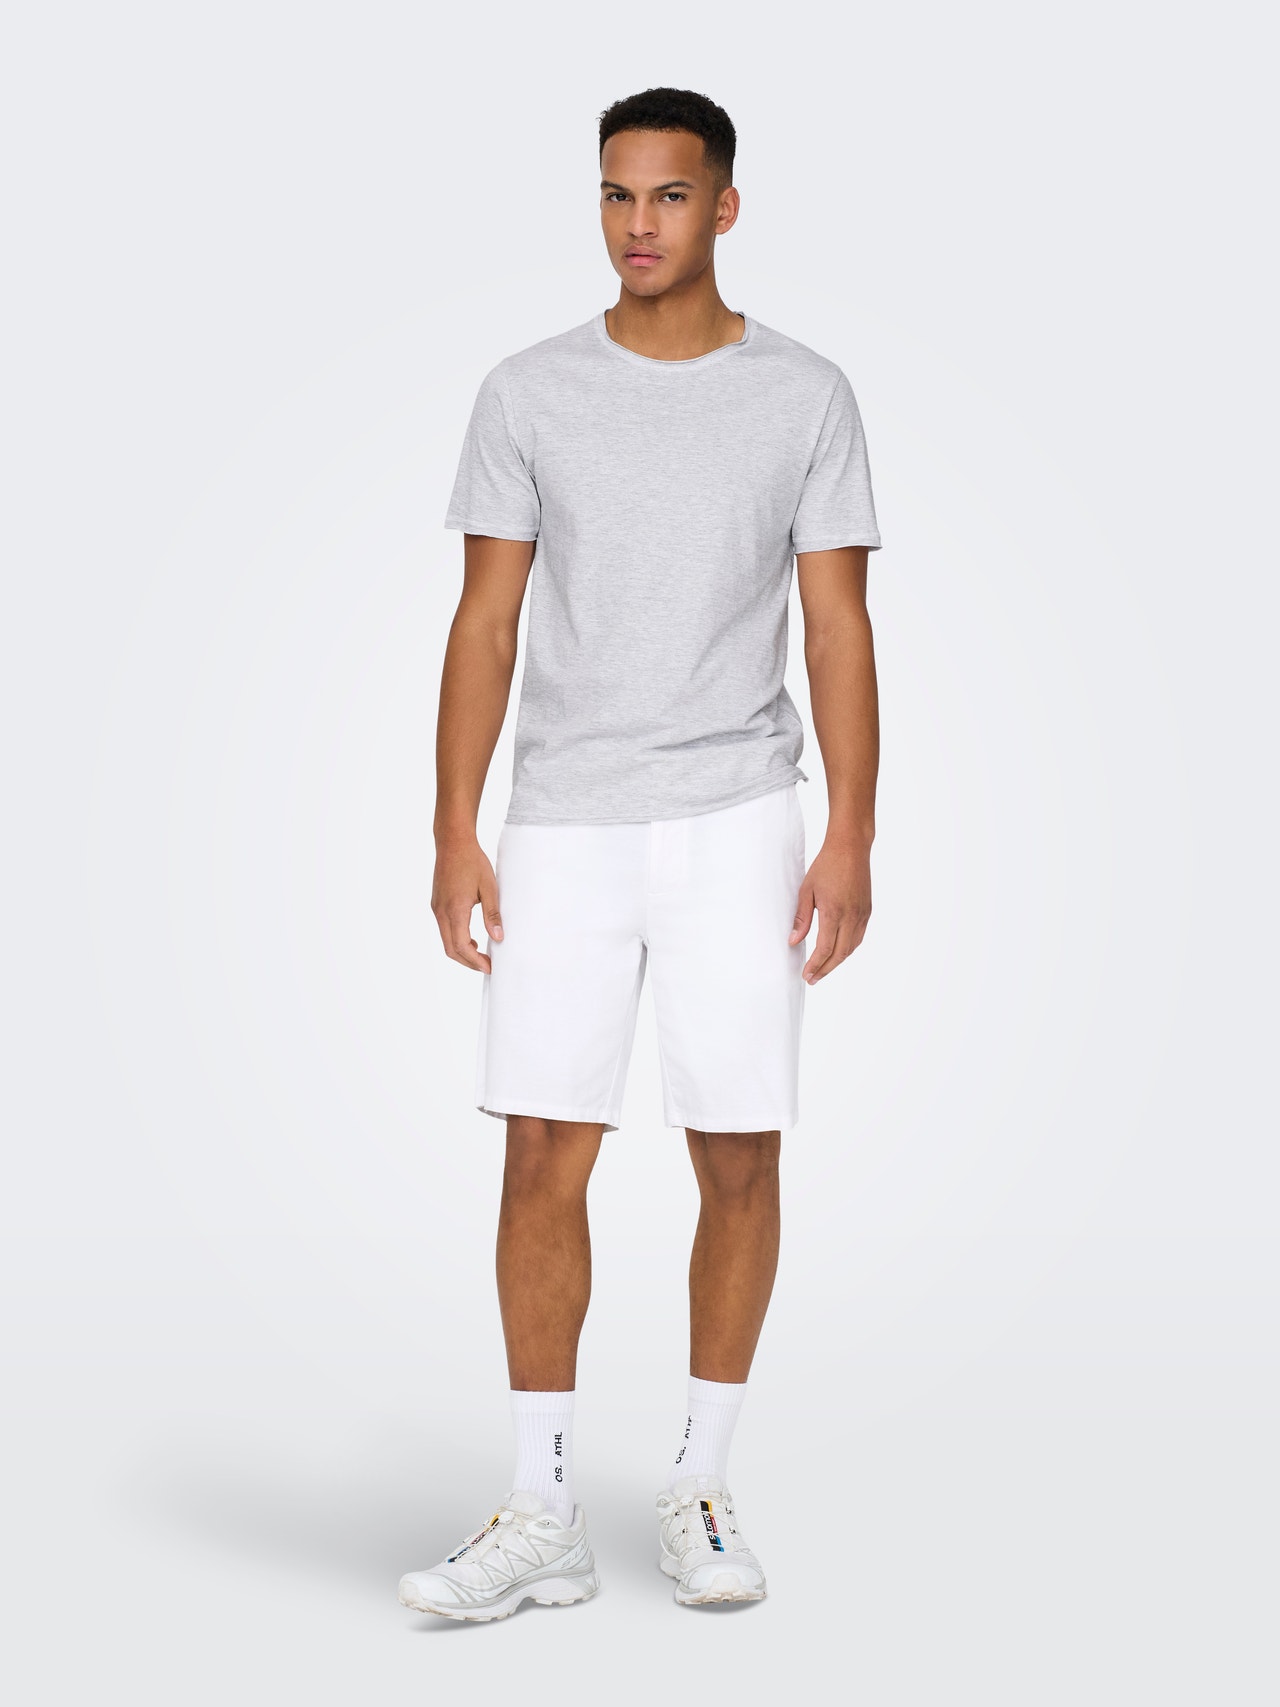 ONLY & SONS Shorts Regular Fit -White - 22024940